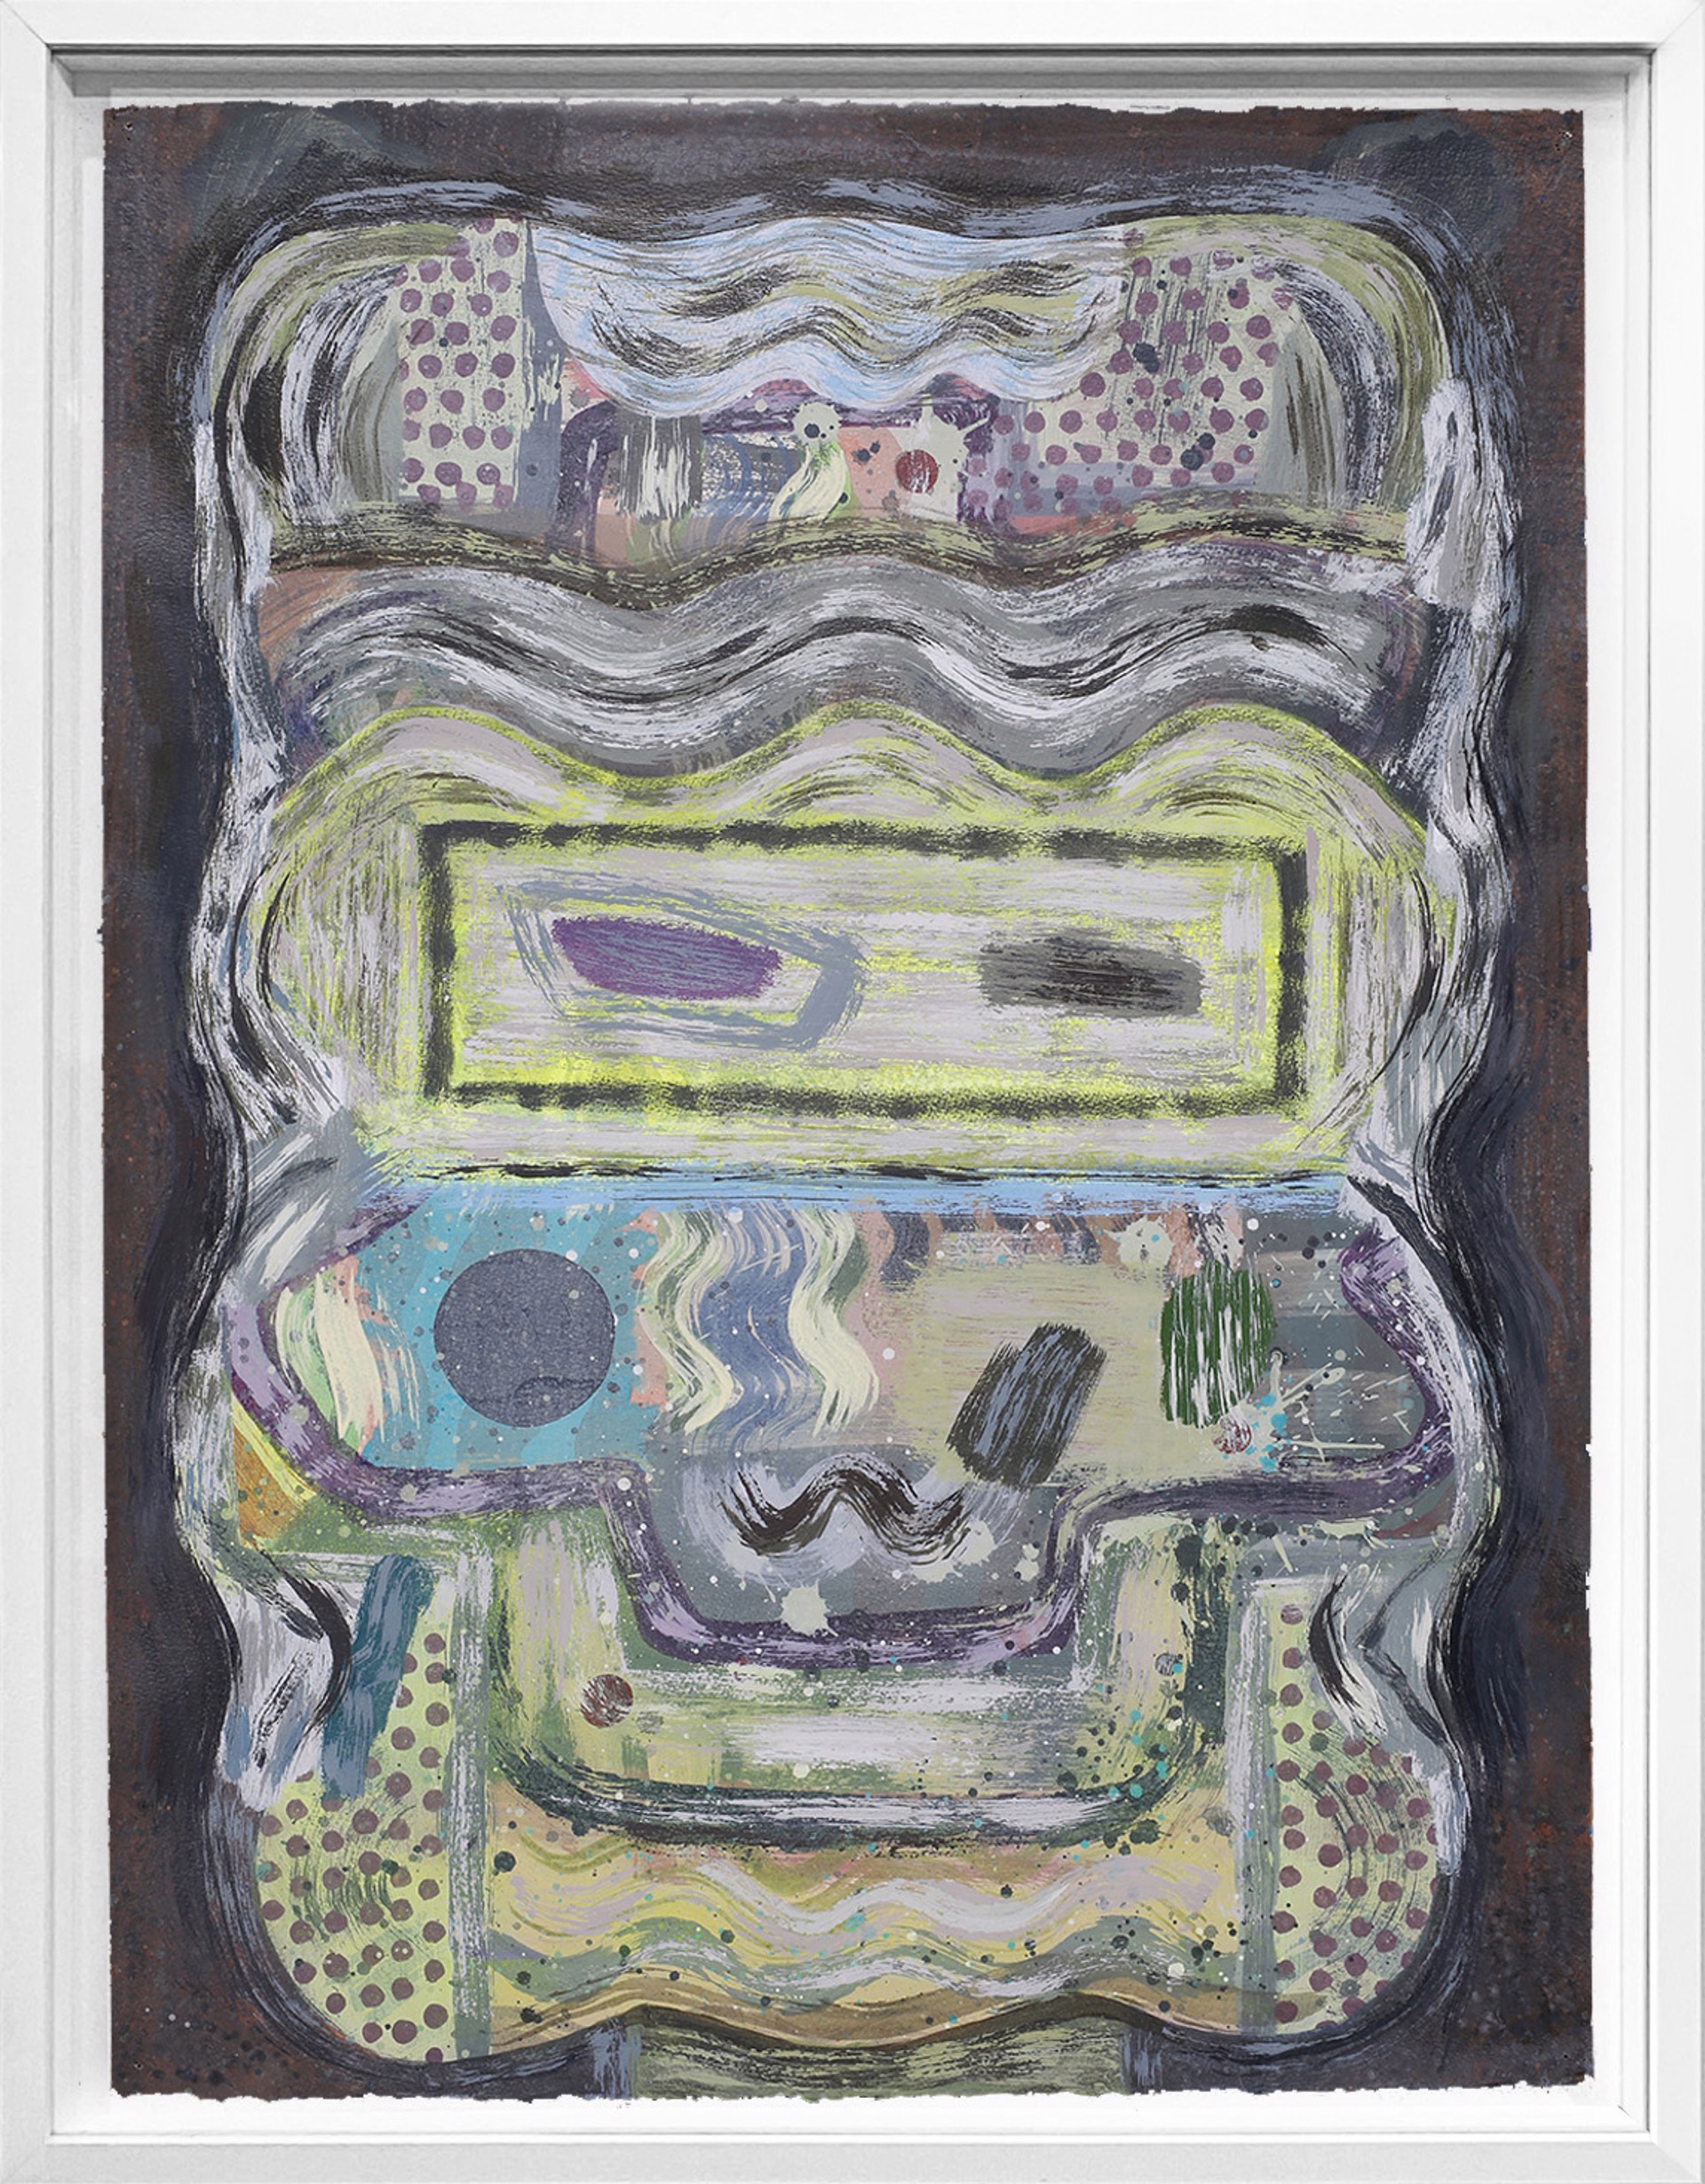 Untitled (Chartreuse Mask) by Sue Havens